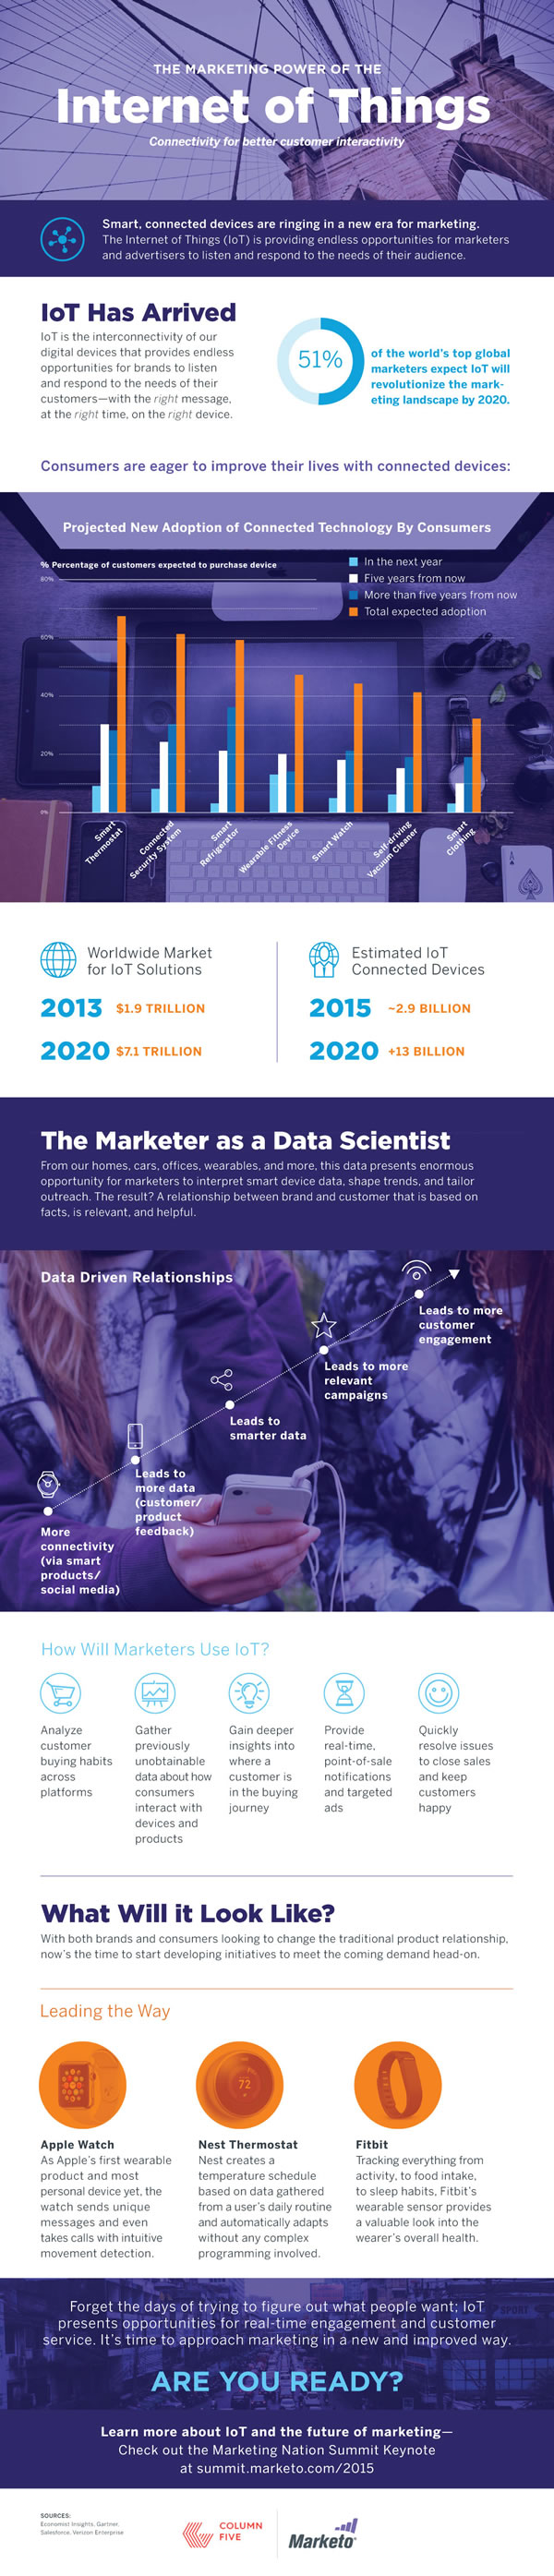 The Internet of Things in marketing - infographic by Marketo